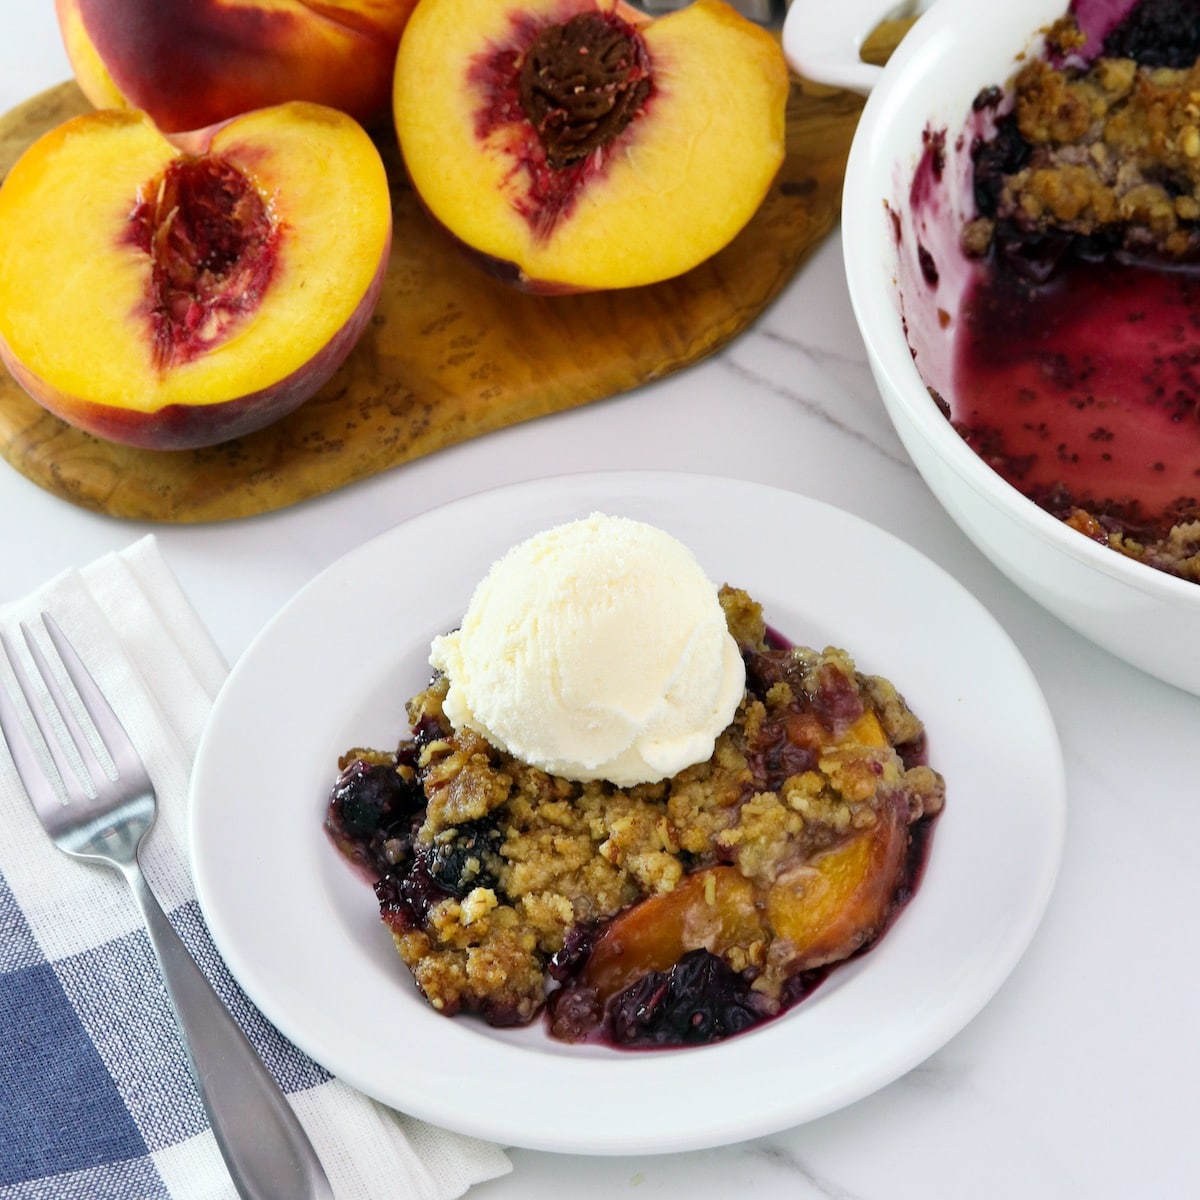 Square image - peach and blueberry crisp on a small white plate, topped with a scoop of vanilla ice cream. A white baking dish of the remaining crisp sits off to the right next to a pile of fresh peaches.